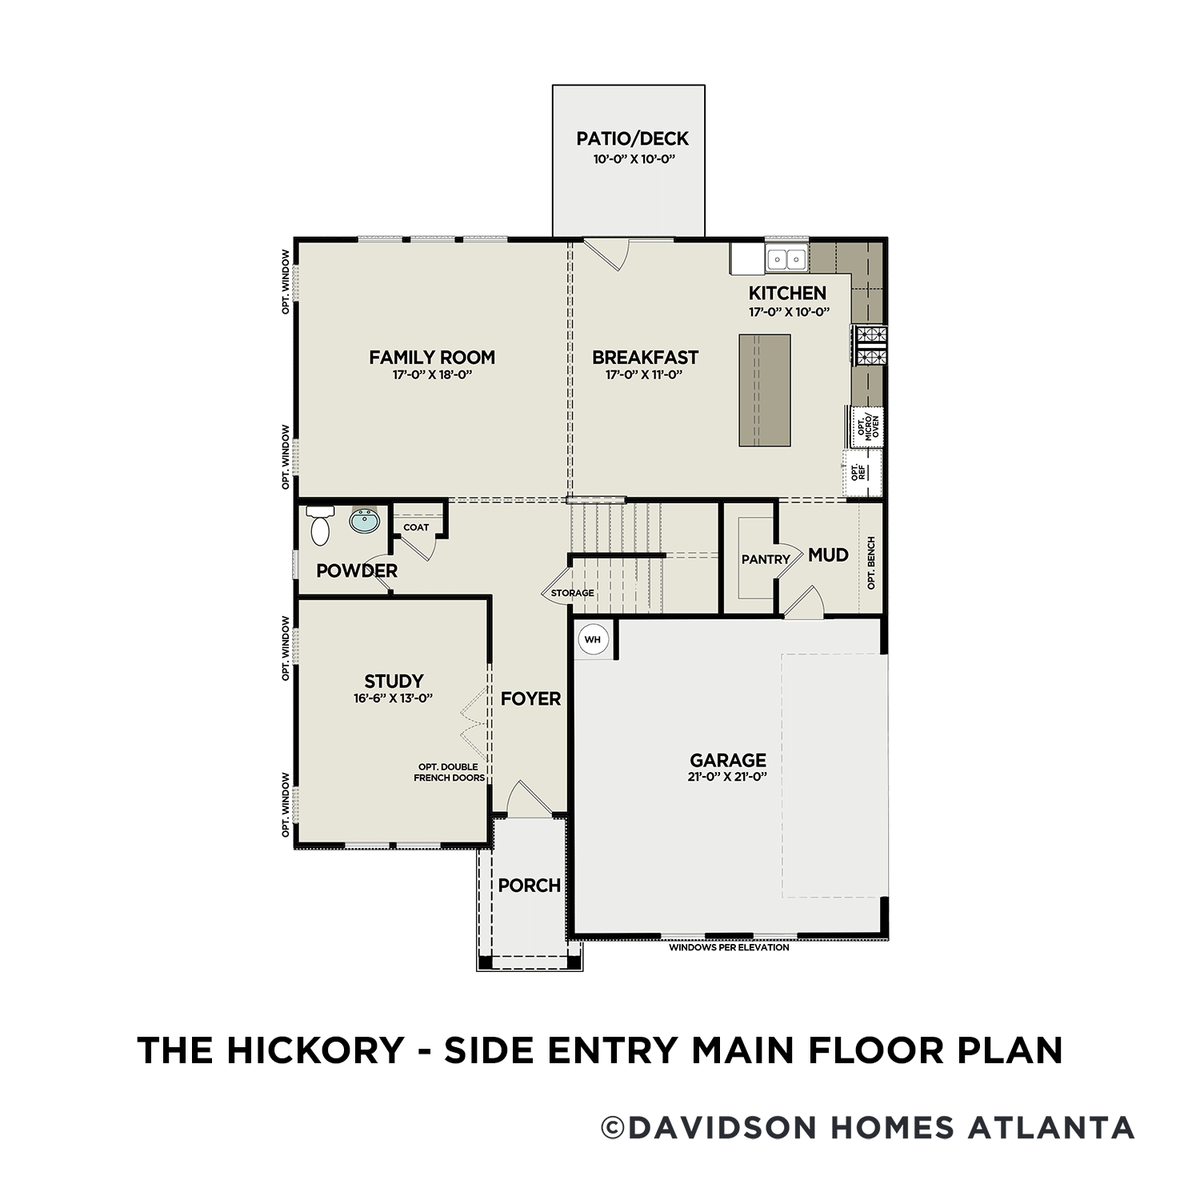 1 - The Hickory C – Side Entry floor plan layout for 105 Leveret Road in Davidson Homes' Everleigh community.